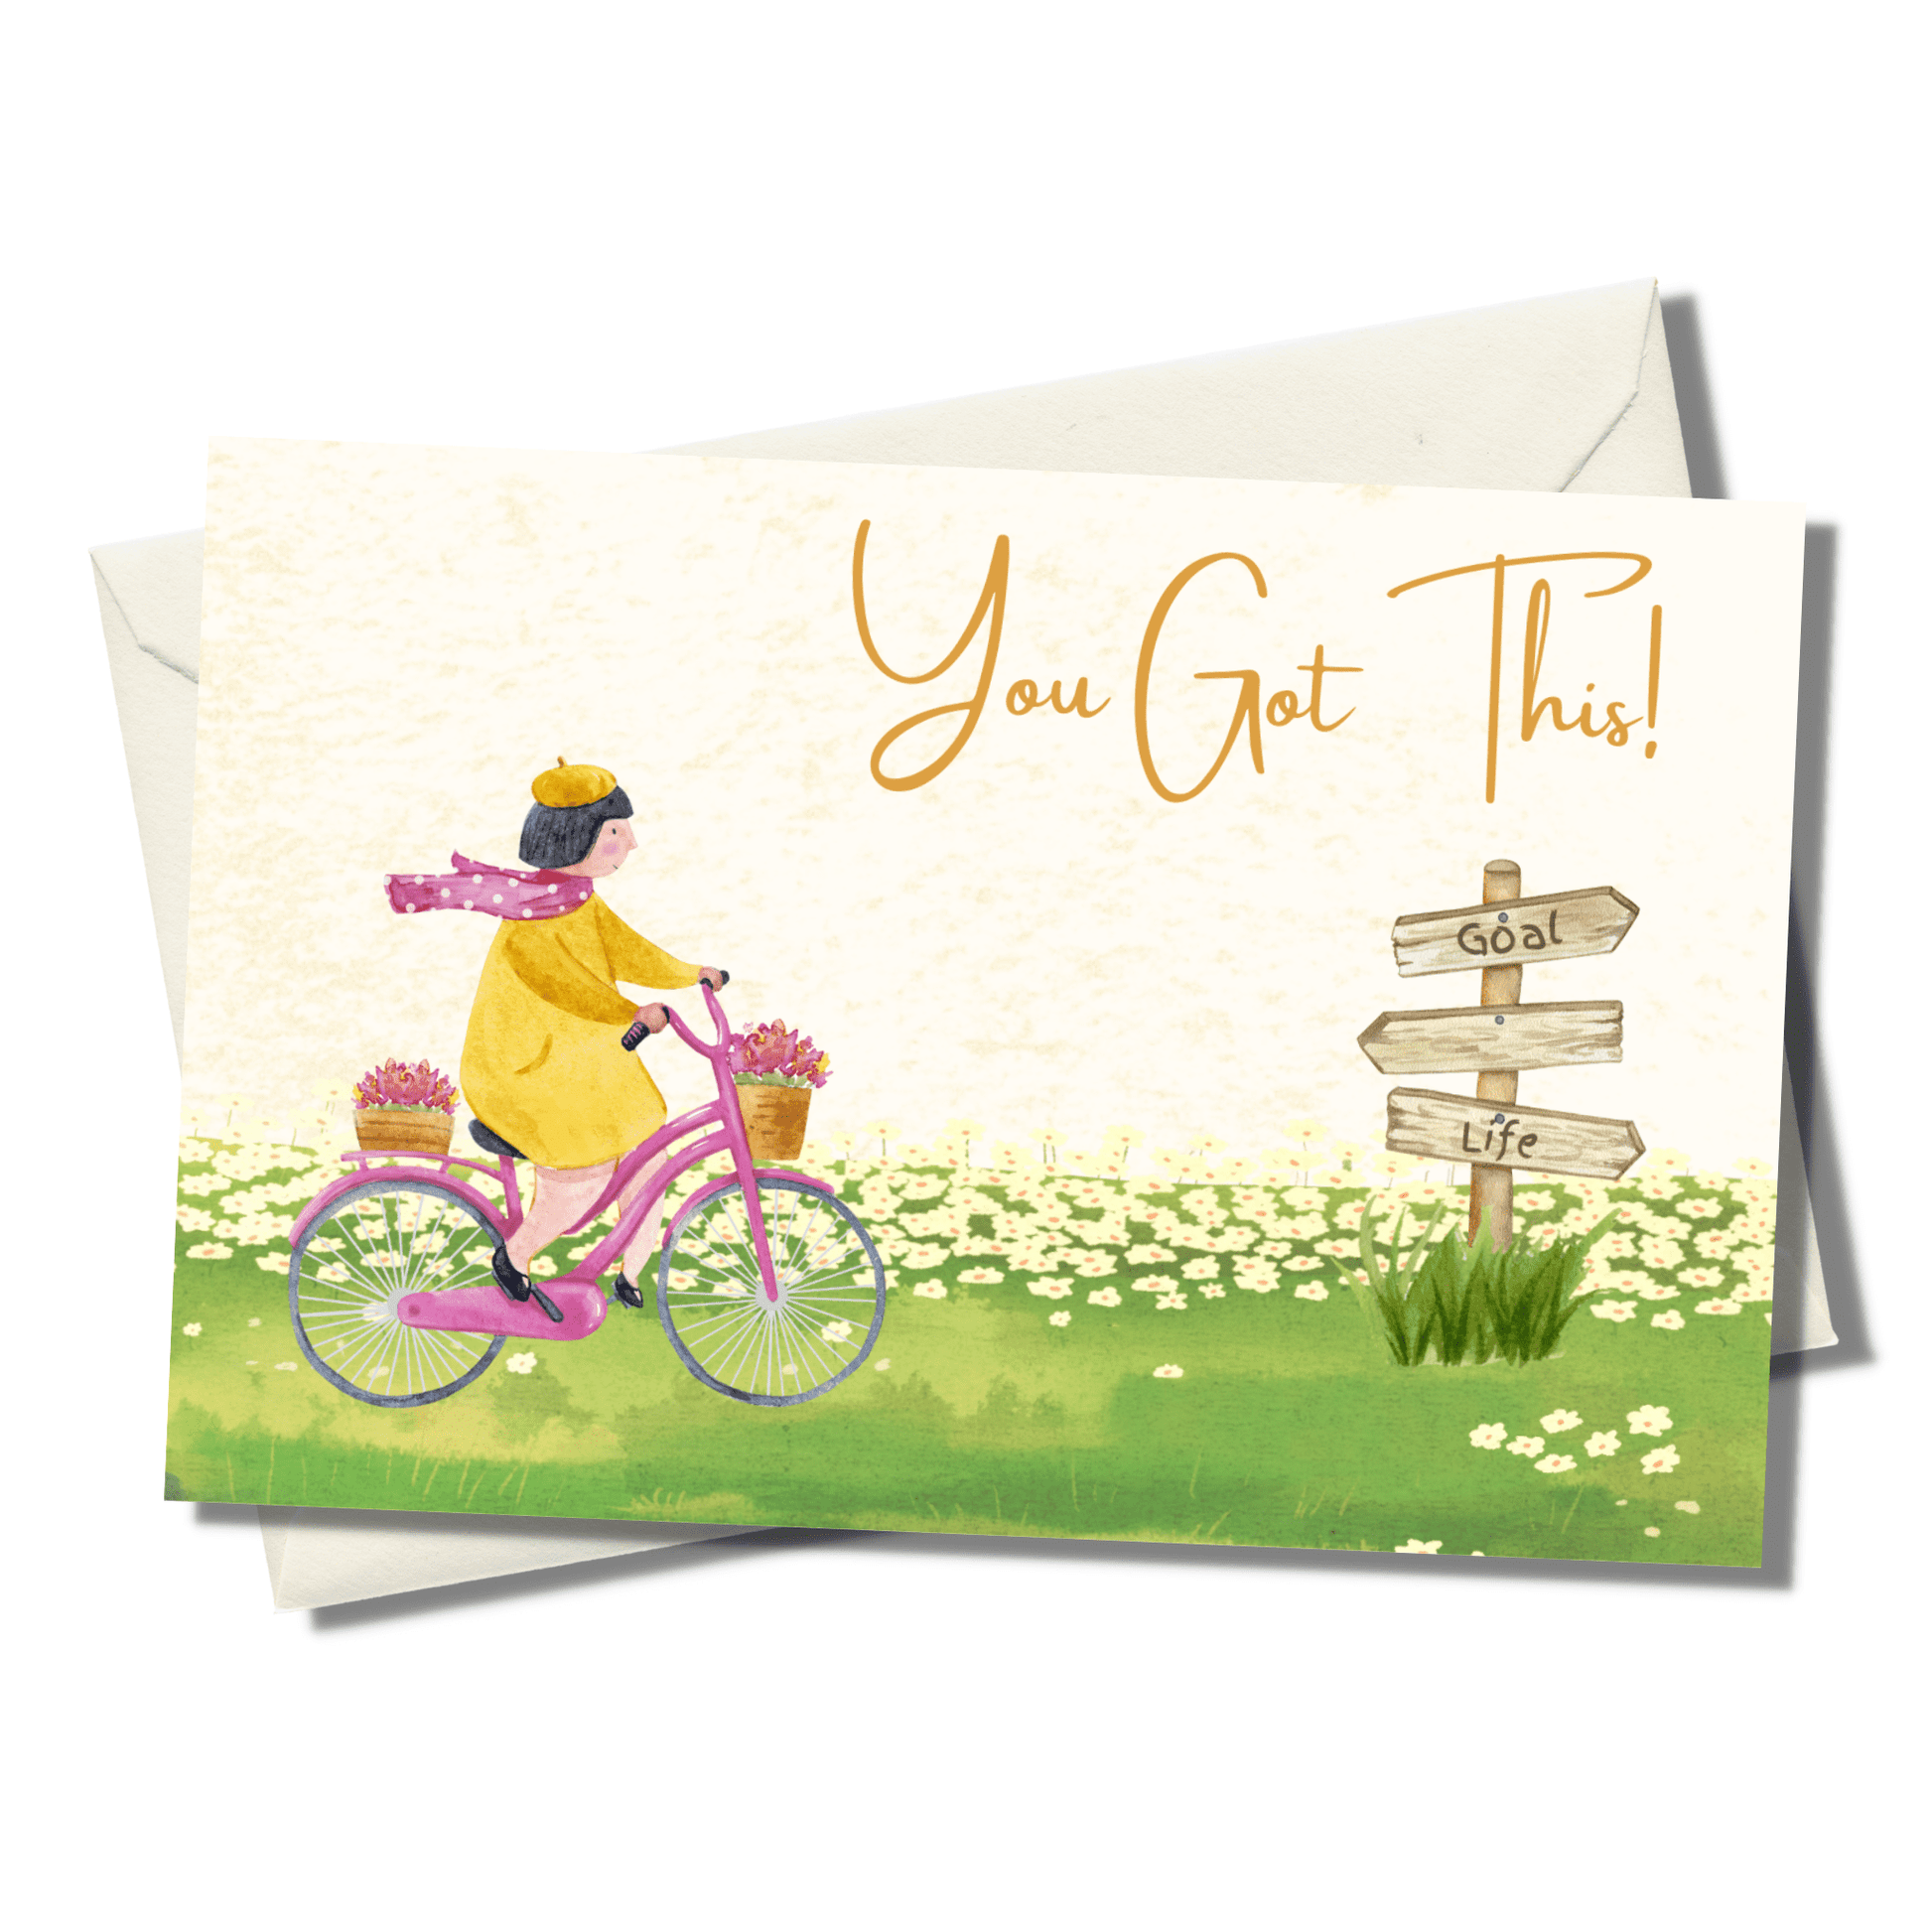 you got this! personalized meditation card